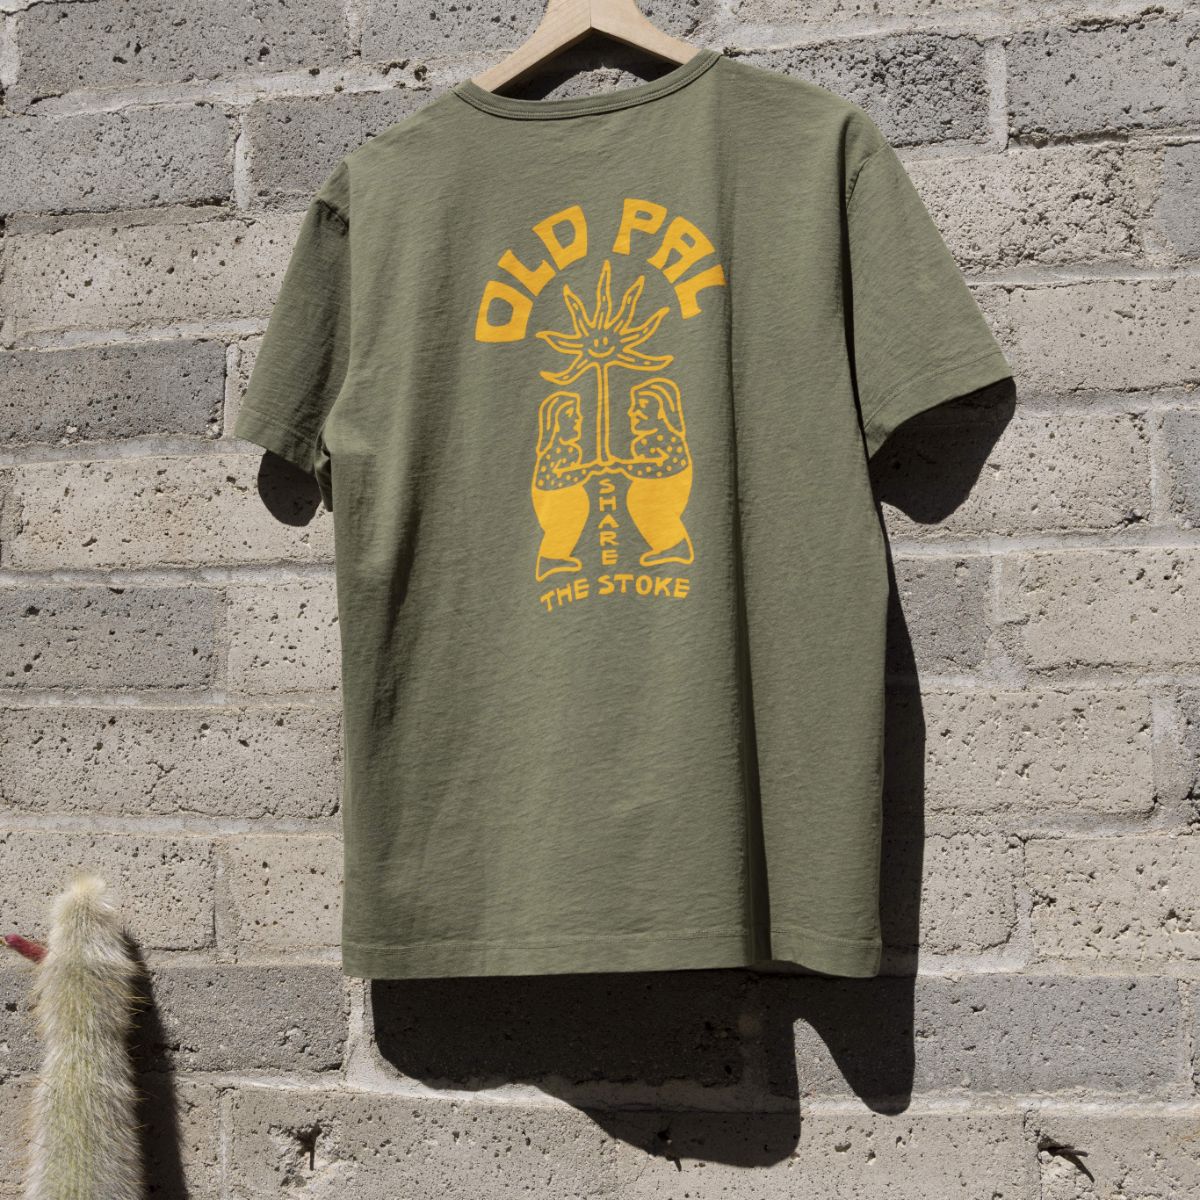 Share the Stoke Pocket Shirt – Old Pal Provisions